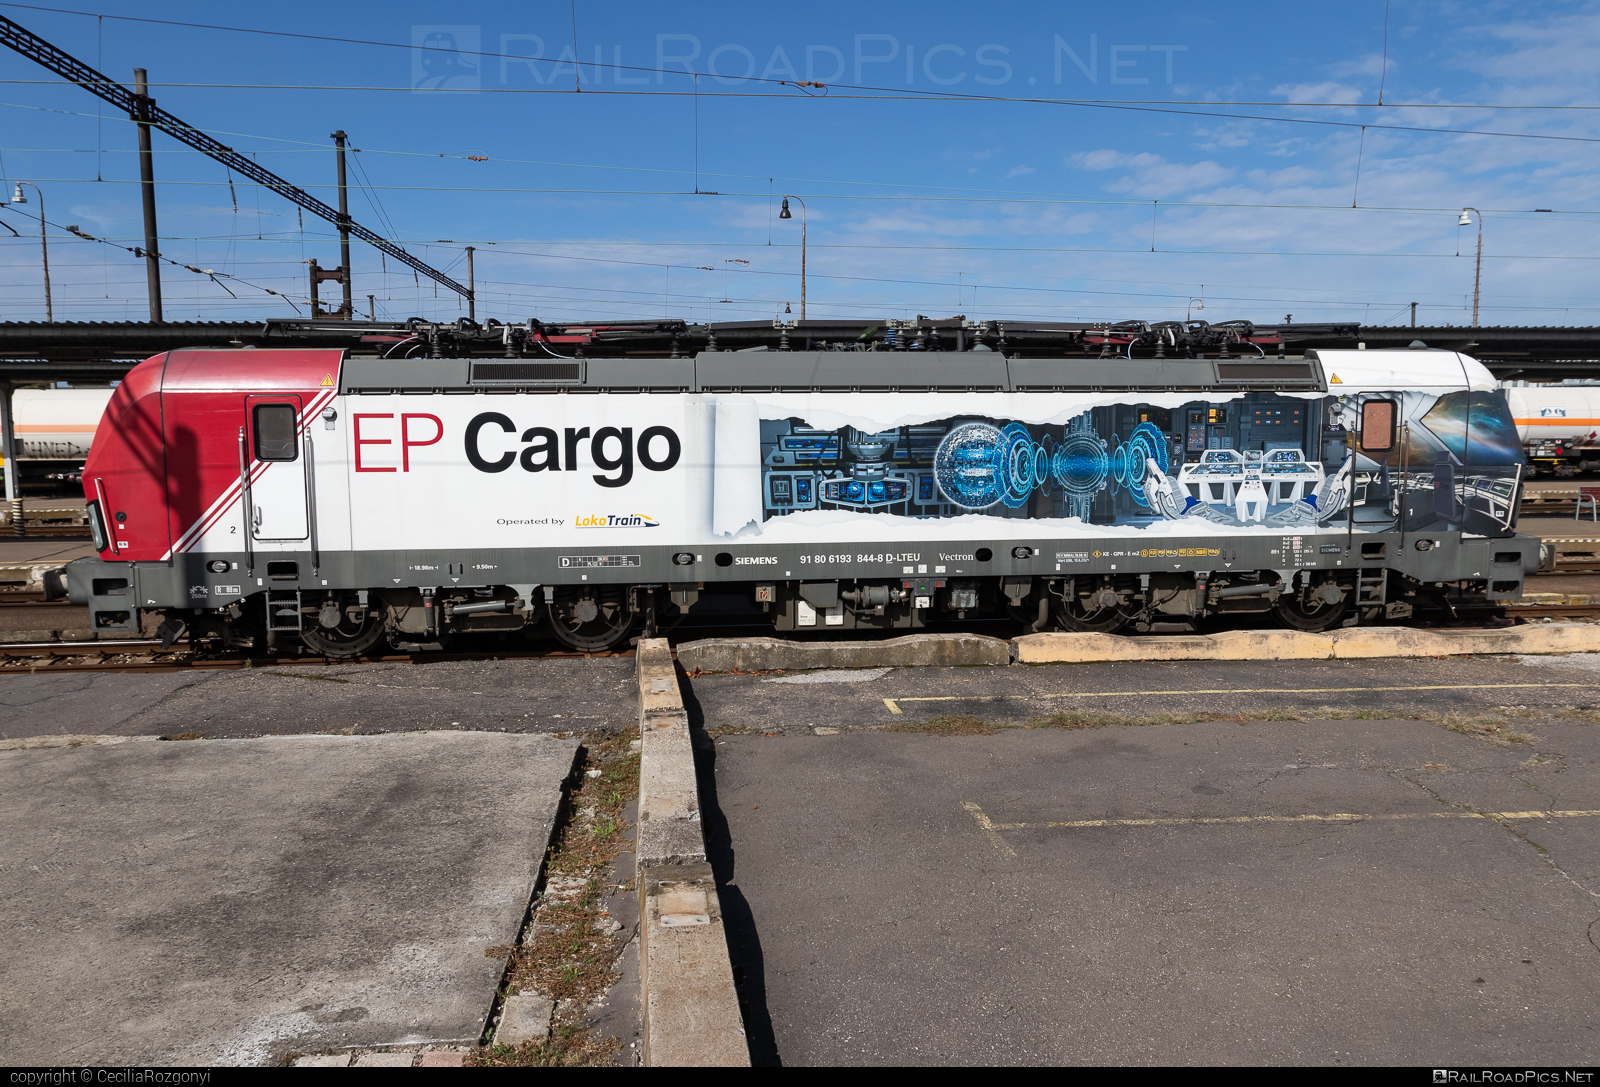 Siemens Vectron MS - 193 844 operated by EP Cargo a.s. #epcargo #epci #lokotrain #lokotrainsro #siemens #siemensVectron #siemensVectronMS #vectron #vectronMS